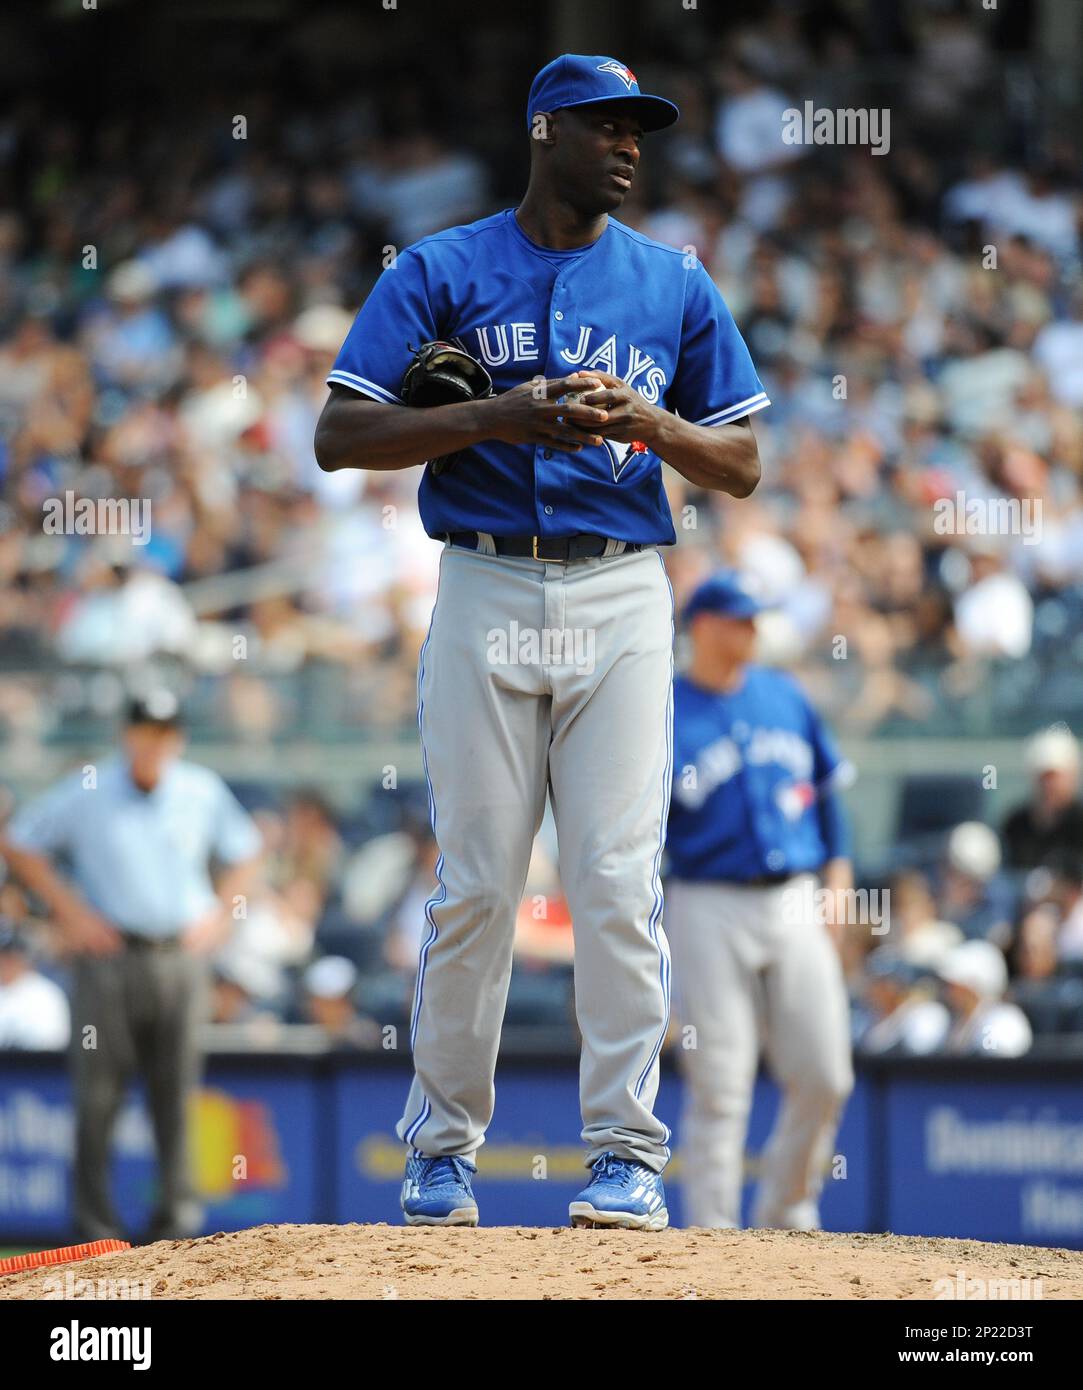 Toronto Blue Jays pitcher LaTroy Hawkins (32) during game against